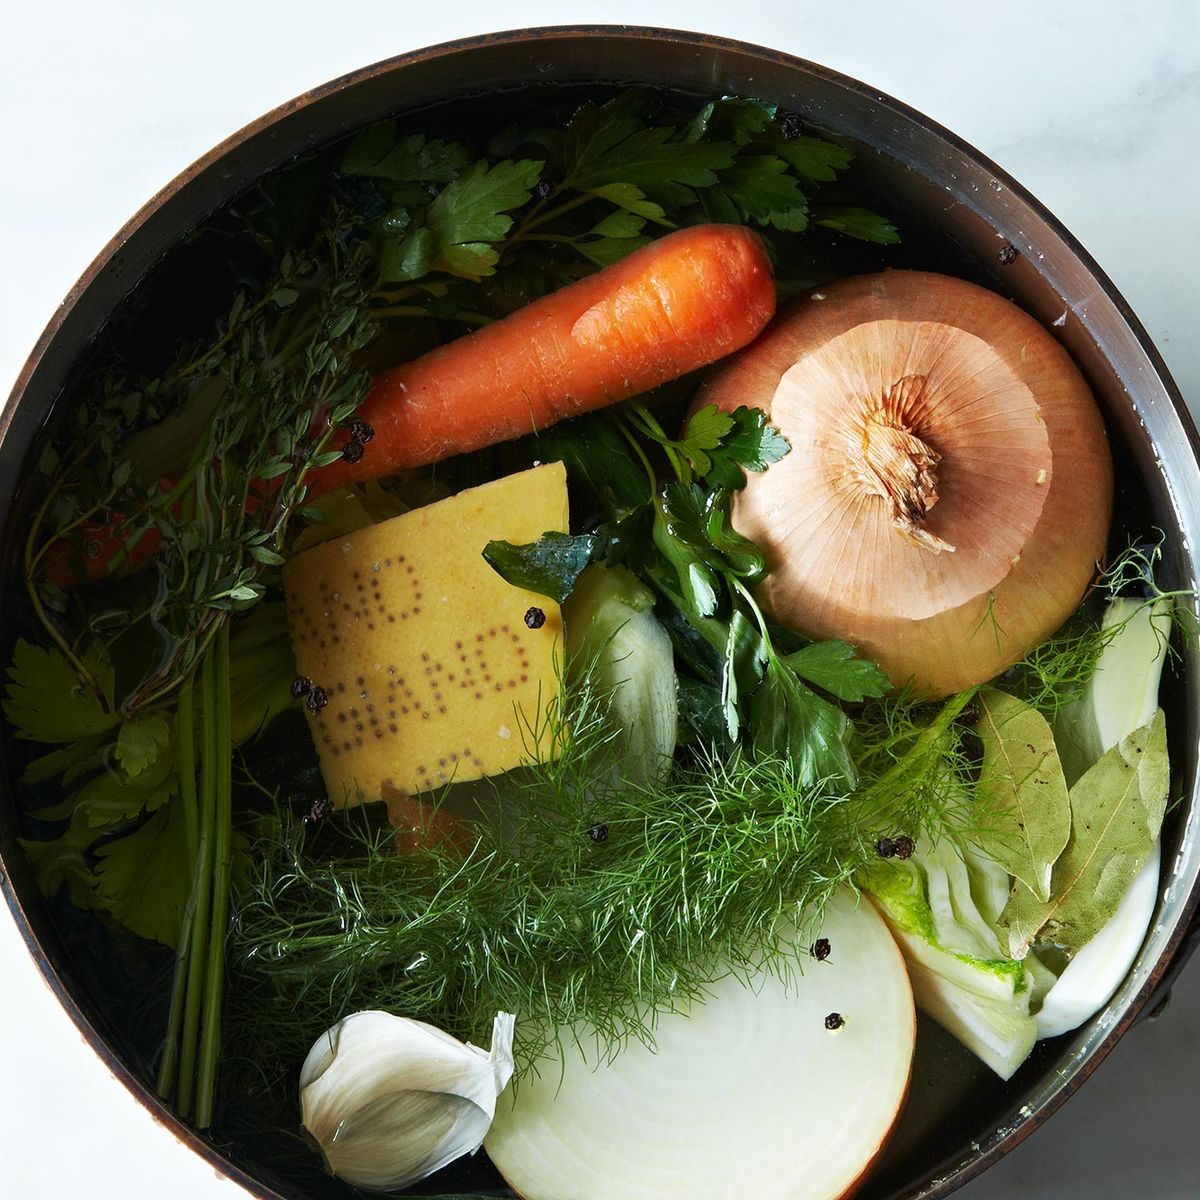 How to Make Vegetable Broth & Stock from Scratch without a Recipe